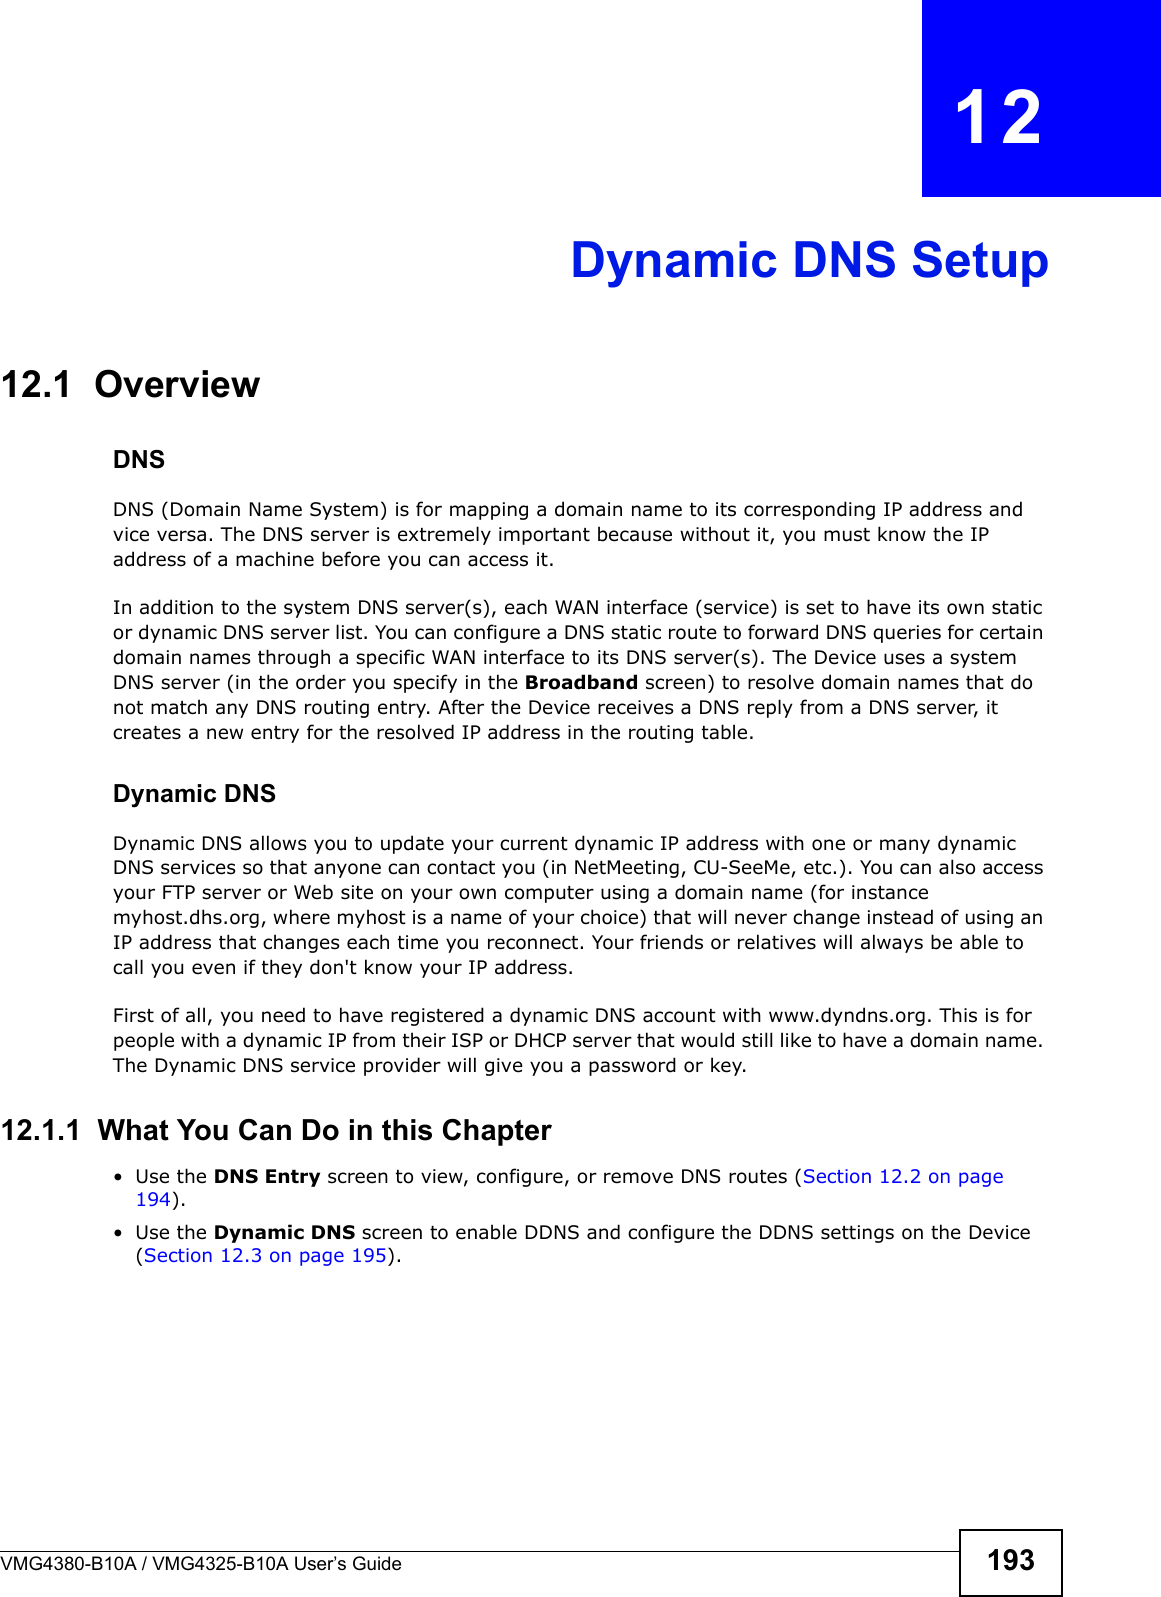 VMG4380-B10A / VMG4325-B10A User’s Guide 193CHAPTER  12Dynamic DNS Setup12.1  Overview DNSDNS (Domain Name System) is for mapping a domain name to its corresponding IP address and vice versa. The DNS server is extremely important because without it, you must know the IP address of a machine before you can access it. In addition to the system DNS server(s), each WAN interface (service) is set to have its own static or dynamic DNS server list. You can configure a DNS static route to forward DNS queries for certain domain names through a specific WAN interface to its DNS server(s). The Device uses a system DNS server (in the order you specify in the Broadband screen) to resolve domain names that do not match any DNS routing entry. After the Device receives a DNS reply from a DNS server, it creates a new entry for the resolved IP address in the routing table.Dynamic DNSDynamic DNS allows you to update your current dynamic IP address with one or many dynamic DNS services so that anyone can contact you (in NetMeeting, CU-SeeMe, etc.). You can also access your FTP server or Web site on your own computer using a domain name (for instance myhost.dhs.org, where myhost is a name of your choice) that will never change instead of using an IP address that changes each time you reconnect. Your friends or relatives will always be able to call you even if they don&apos;t know your IP address.First of all, you need to have registered a dynamic DNS account with www.dyndns.org. This is for people with a dynamic IP from their ISP or DHCP server that would still like to have a domain name. The Dynamic DNS service provider will give you a password or key.12.1.1  What You Can Do in this Chapter• Use the DNS Entry screen to view, configure, or remove DNS routes (Section 12.2 on page194).• Use the Dynamic DNS screen to enable DDNS and configure the DDNS settings on the Device (Section 12.3 on page 195).